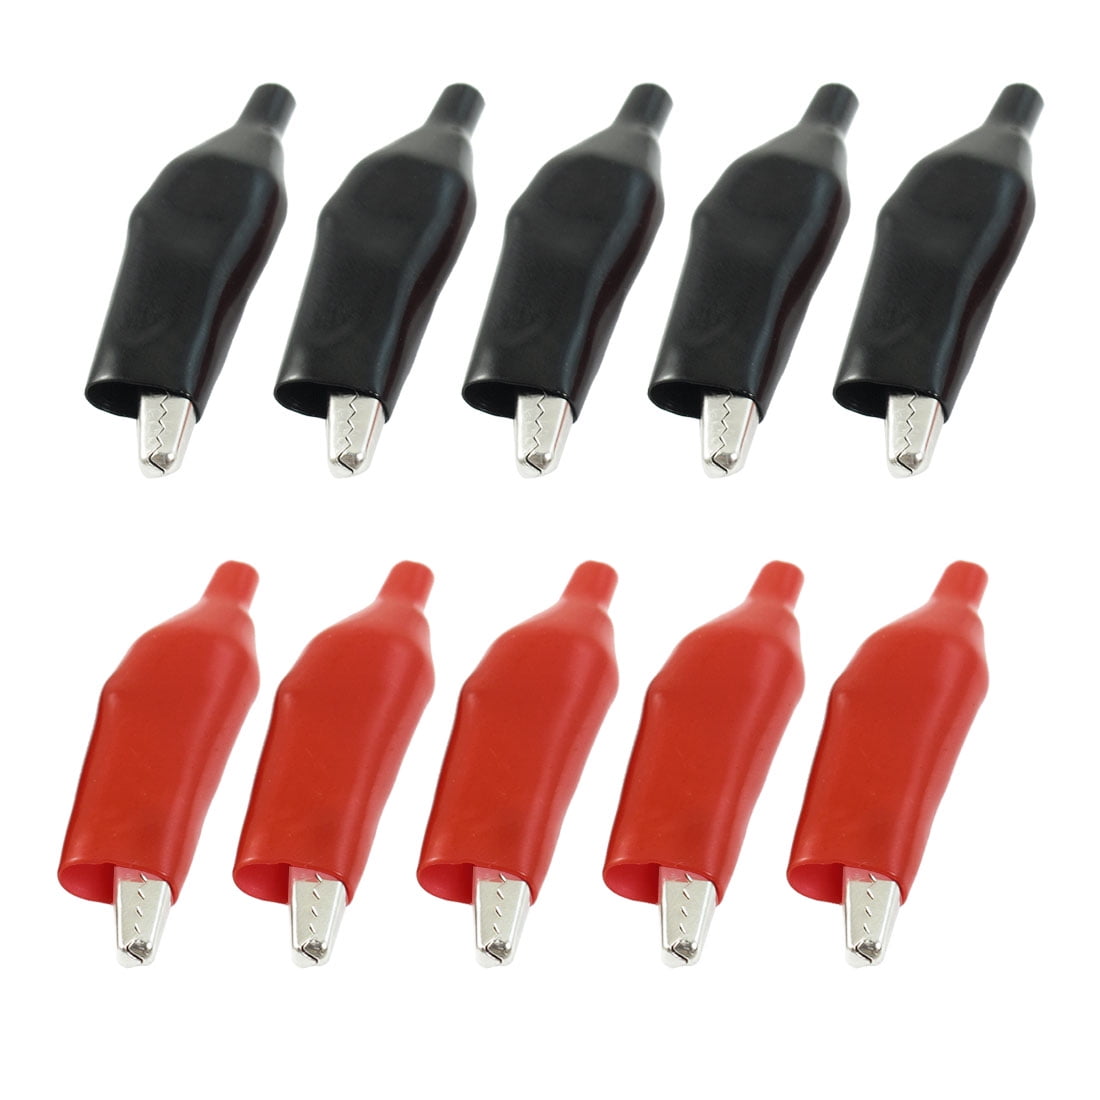 10x Insulated Alligator Clips Crocodile Connector Clamp Testing Probe Red/Black. 